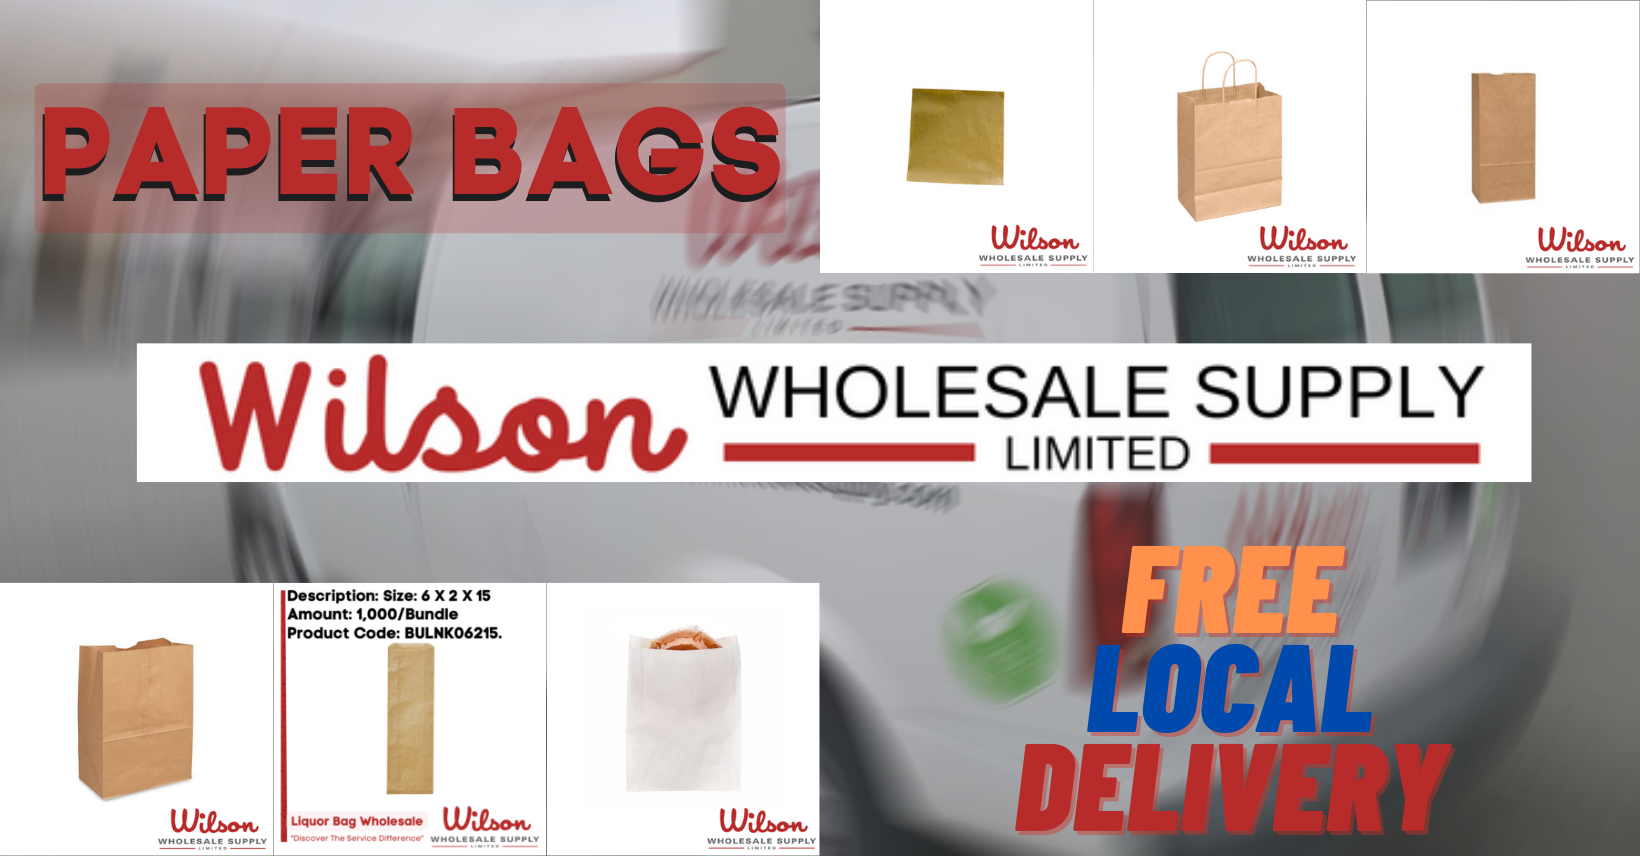 Grease Proof Paper - Wilson Wholesale Supply